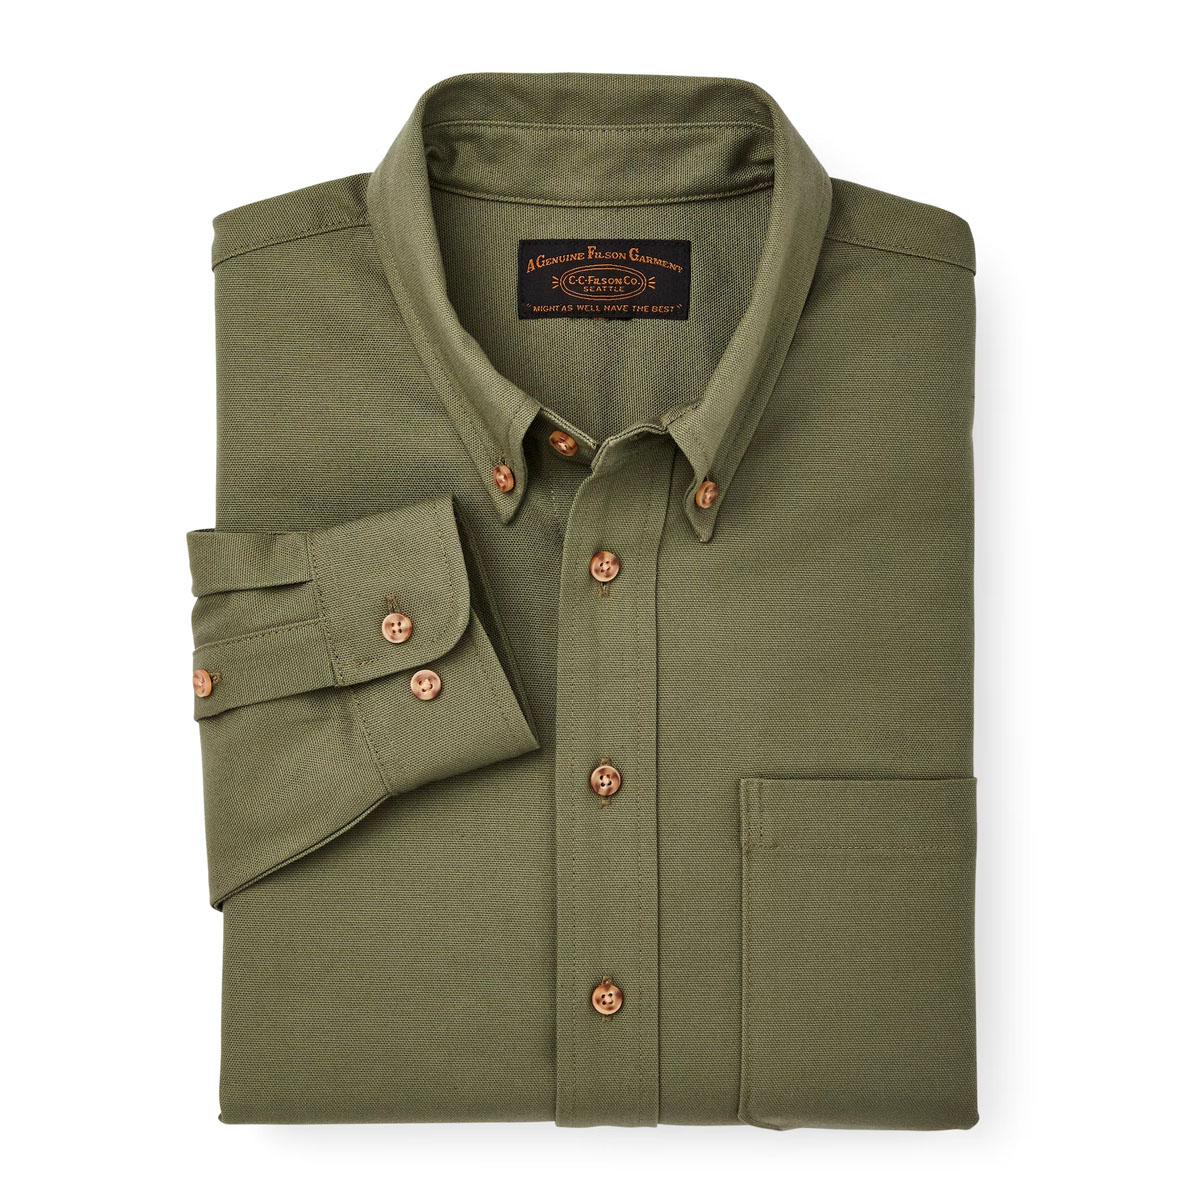 Filson Iron Cloth Oxford Shirt Burnt Olive, classic button-down shirt for everyday wear